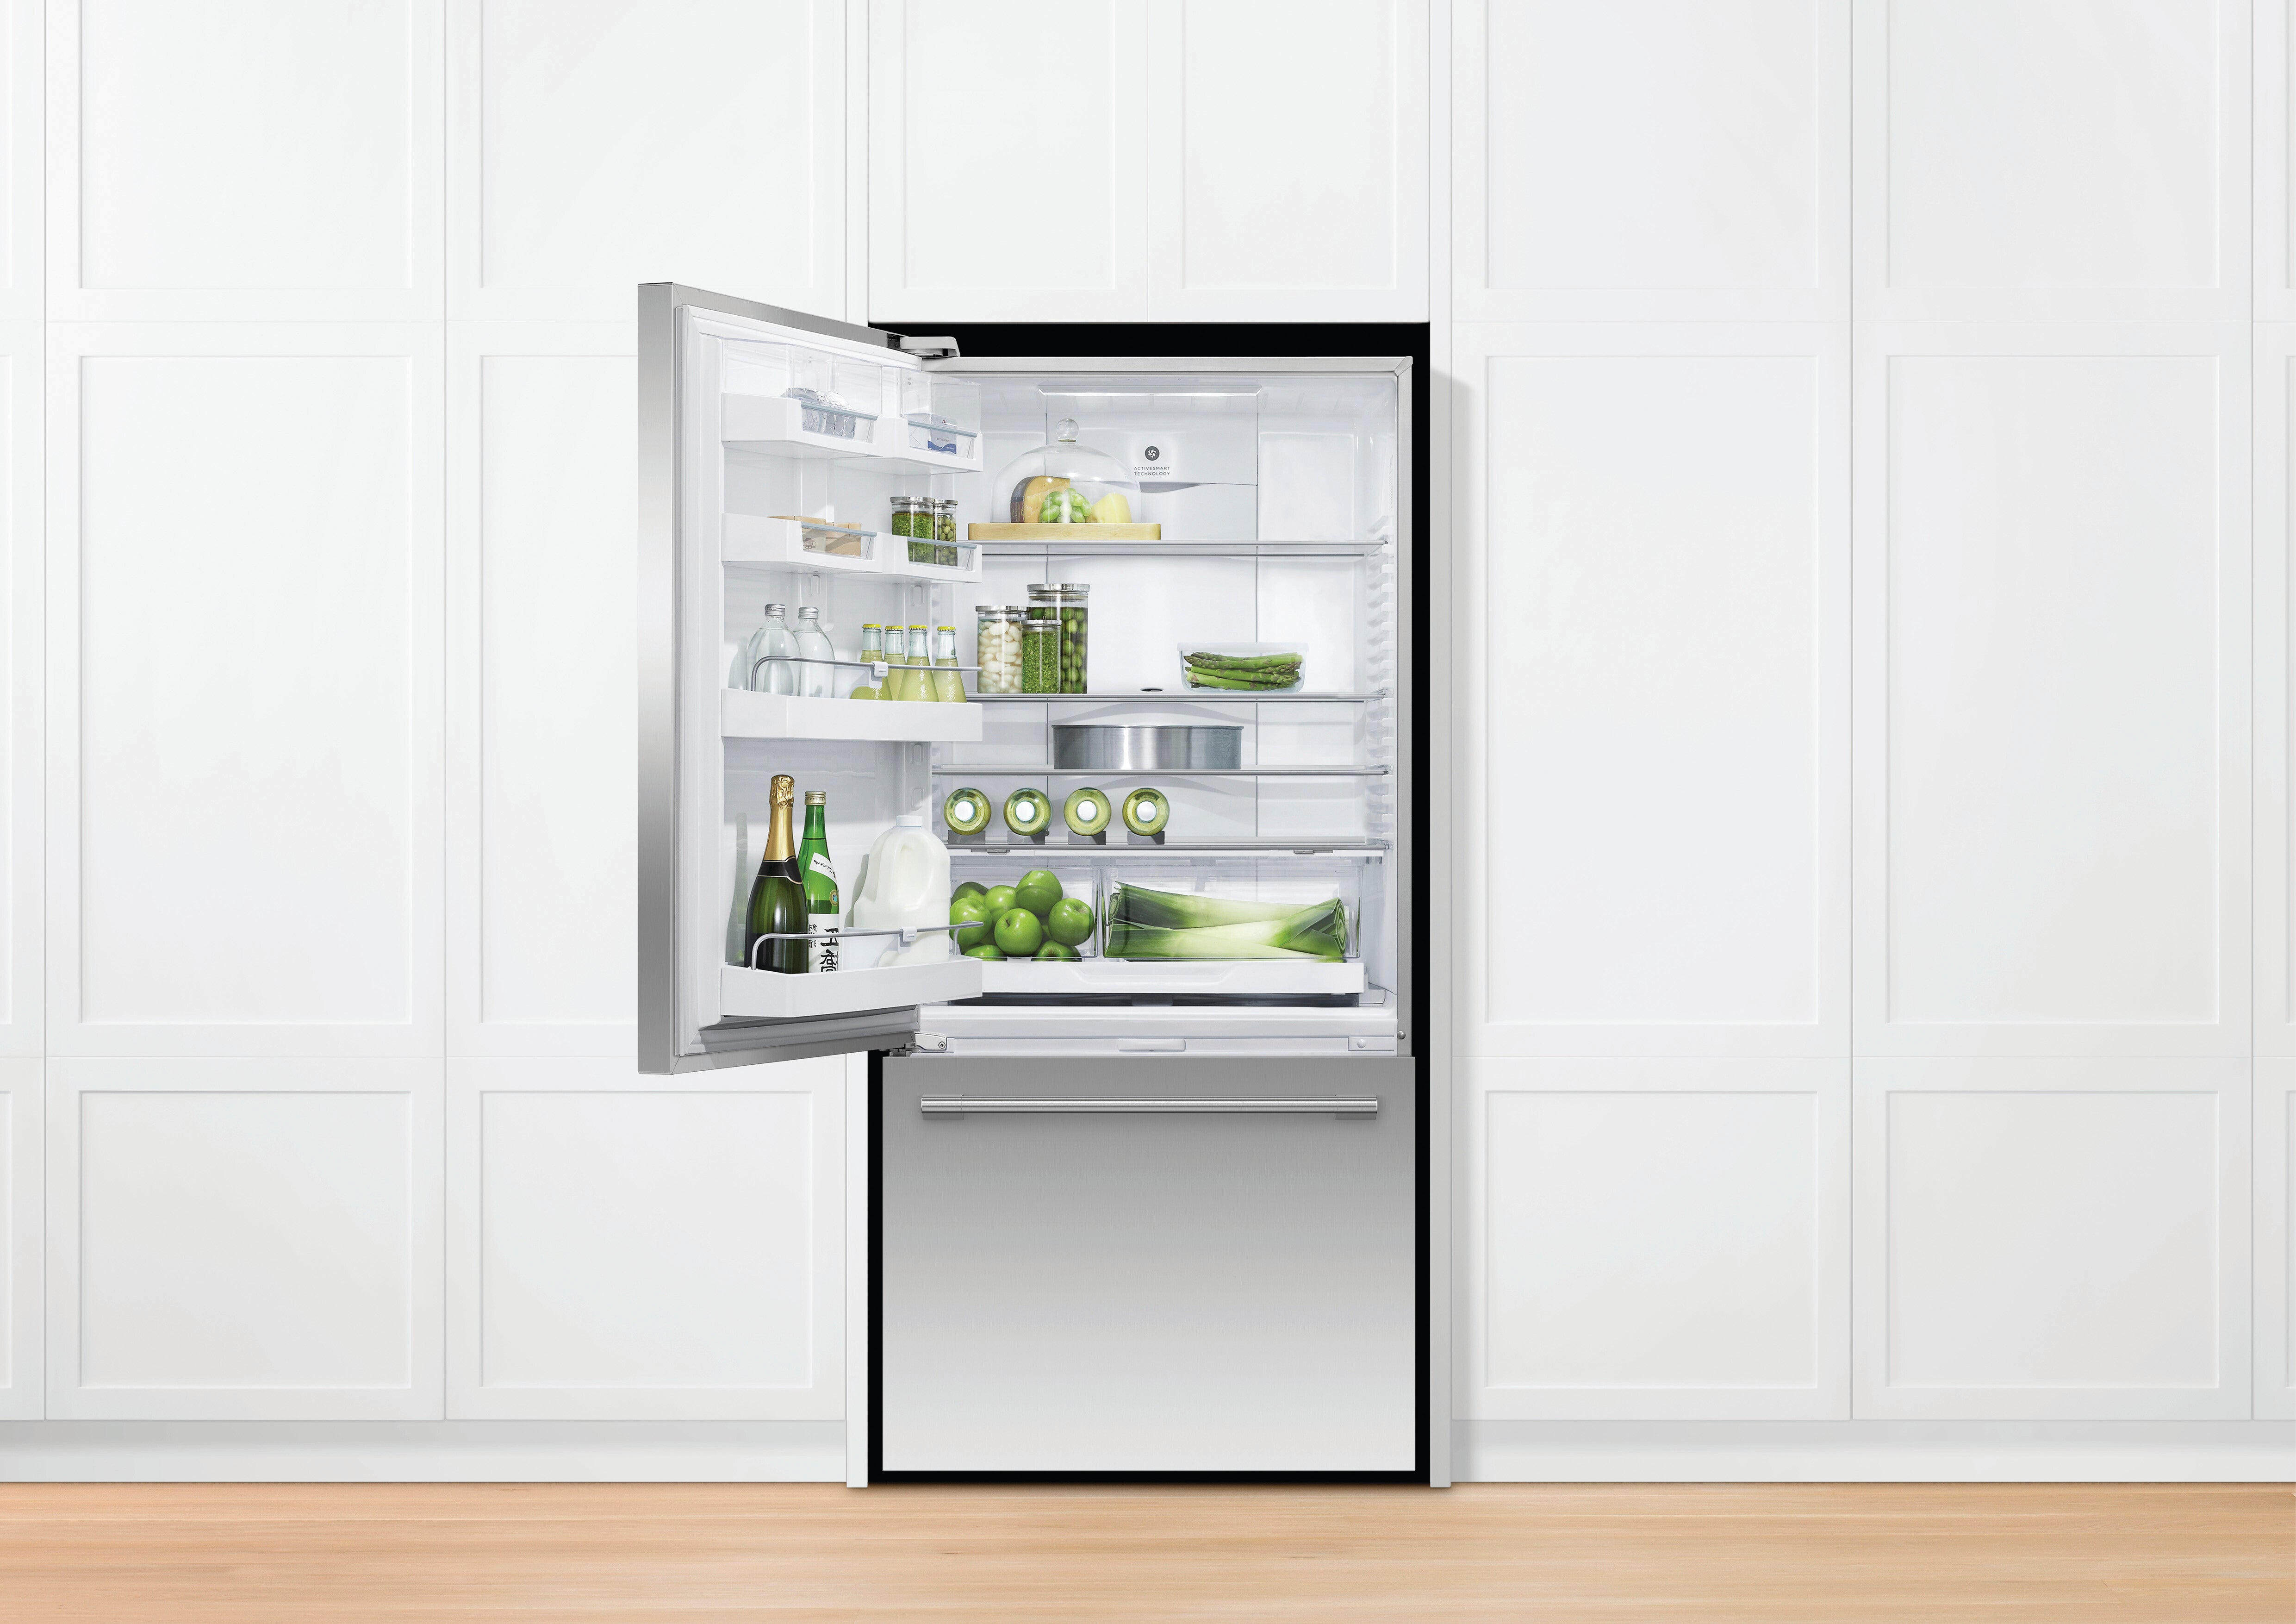 Fisher Paykel - 32 Inch 17.1 cu. ft Bottom Mount Refrigerator in Stainless - RF170WLHUX1